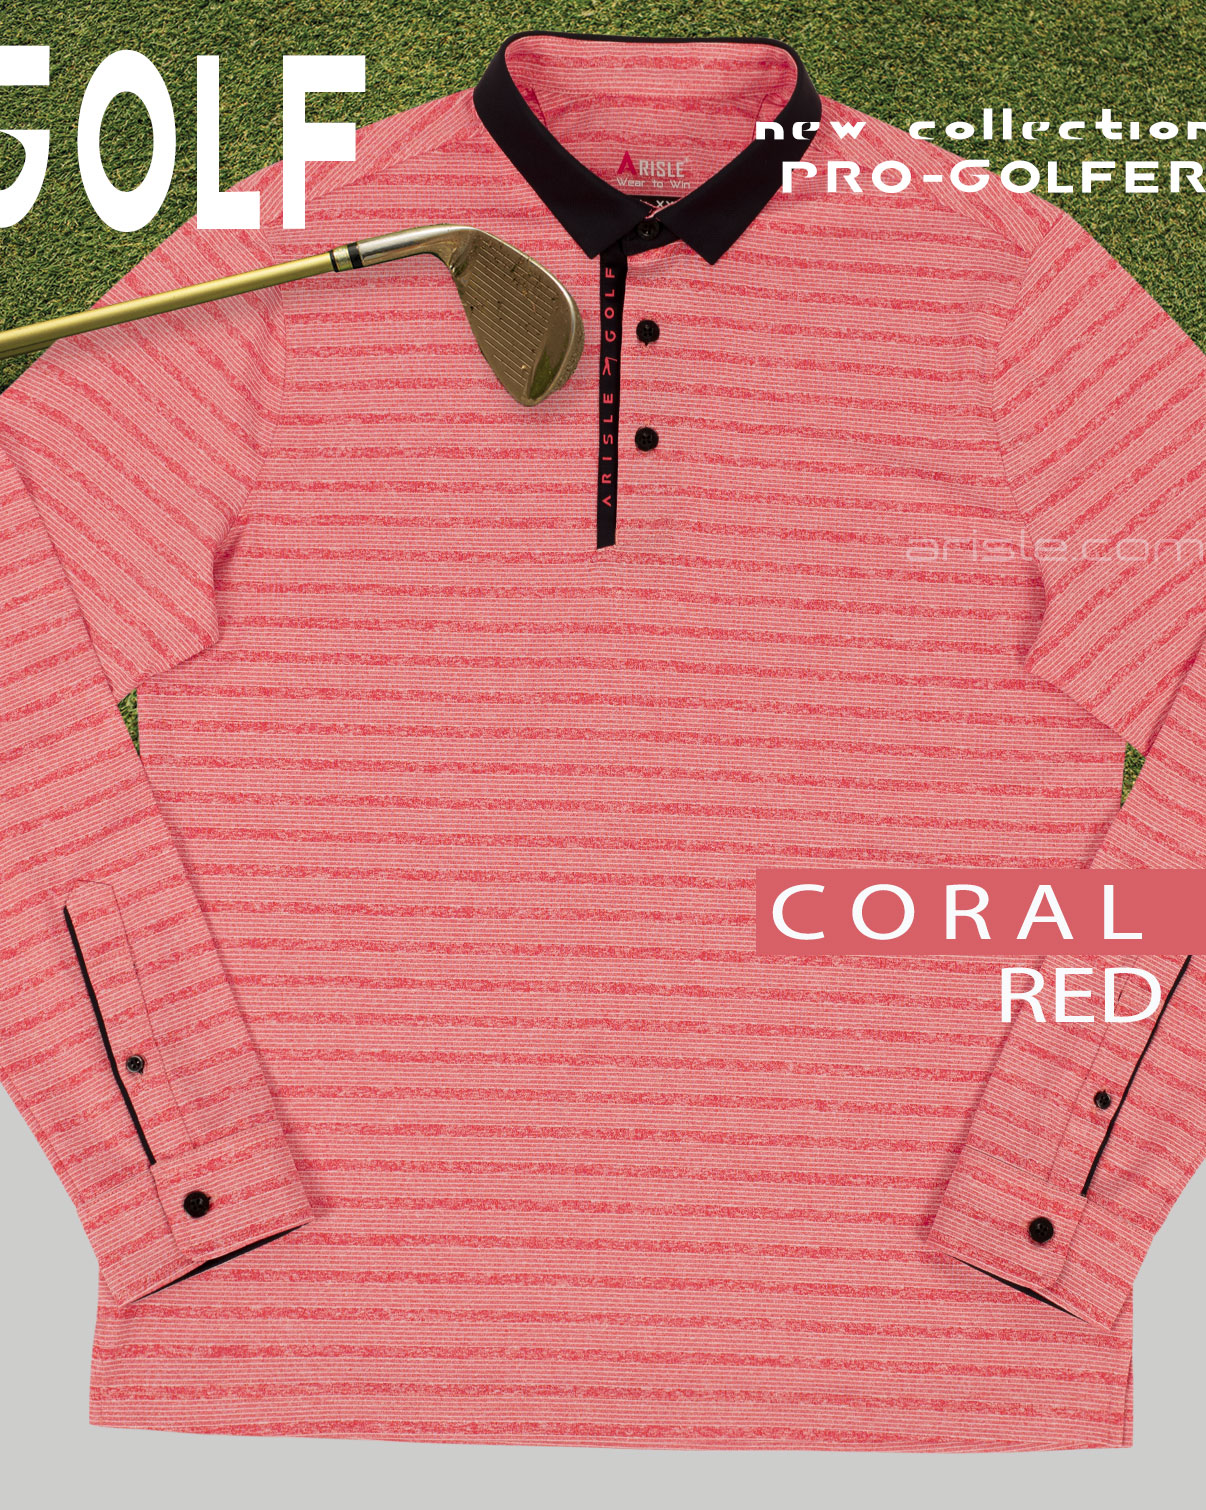 ARISLE-Long-Sleeve-Golf-Polo-Coral-Red-8-